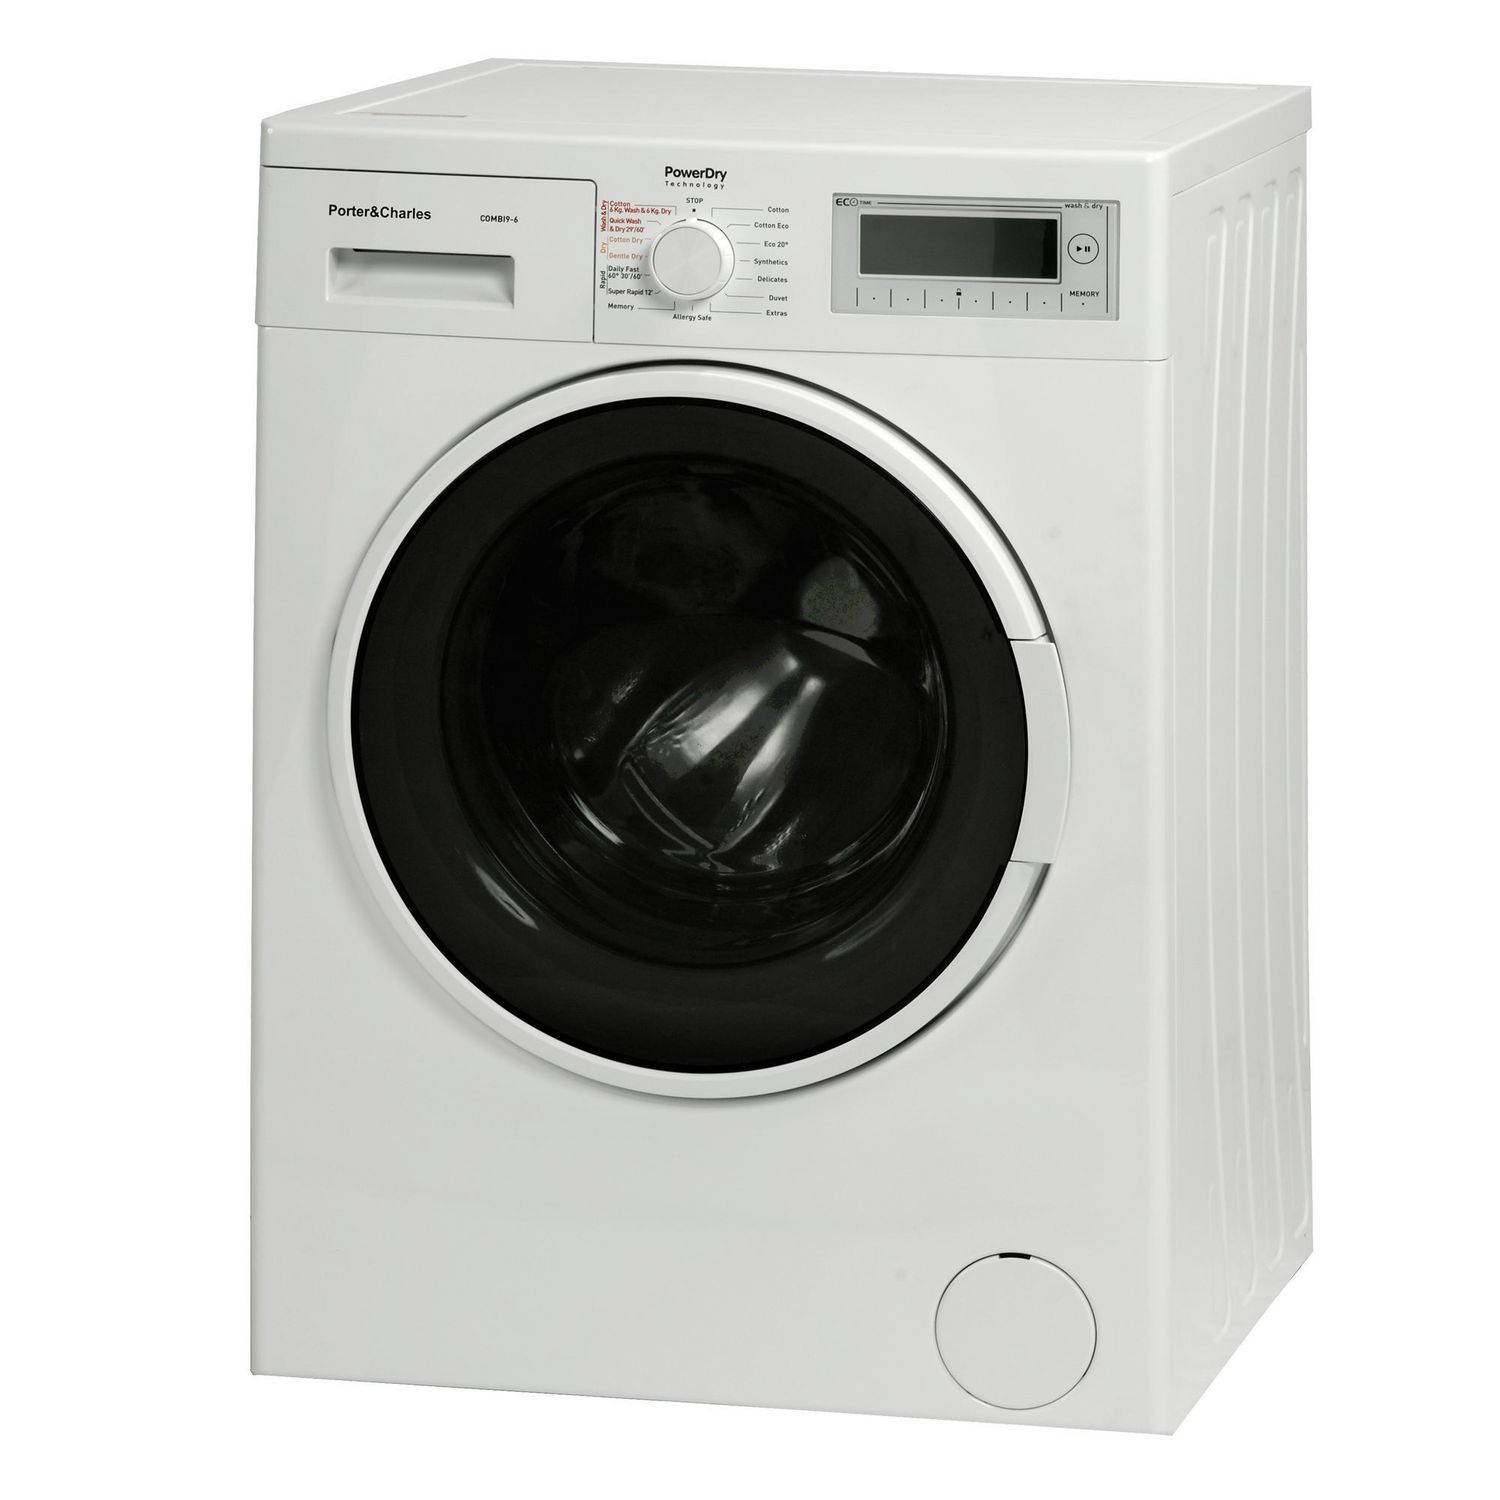 P&C, 2 in 1 9kg Wash and 6kg Dryer Combo Walmart Canada